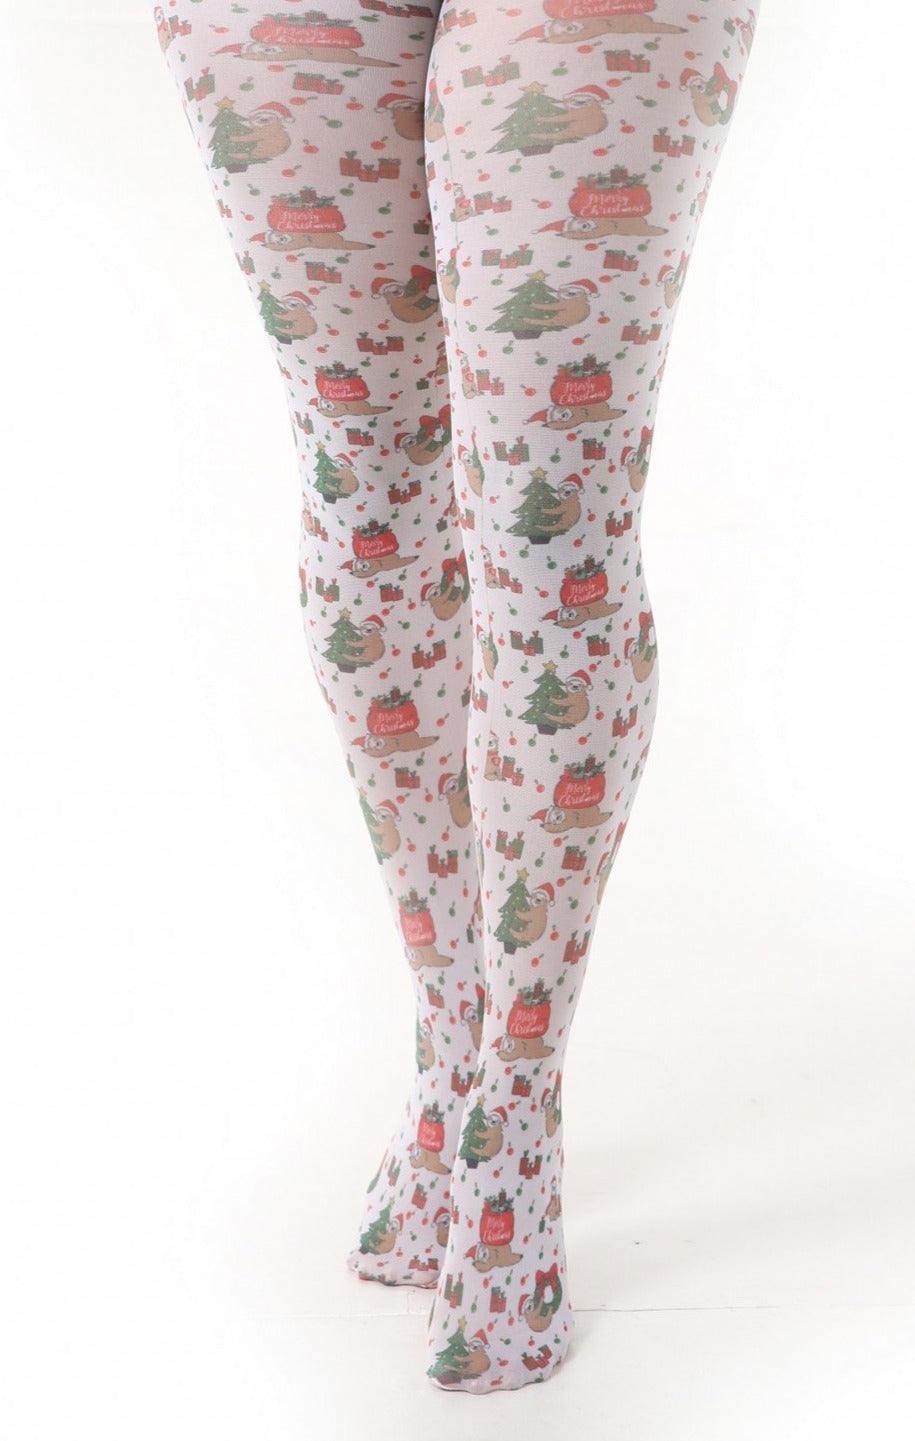 Pamela Mann Christams Sloth Tights - Novelty Christams tights with sloths and Xmas trees and wreaths printed pattern.